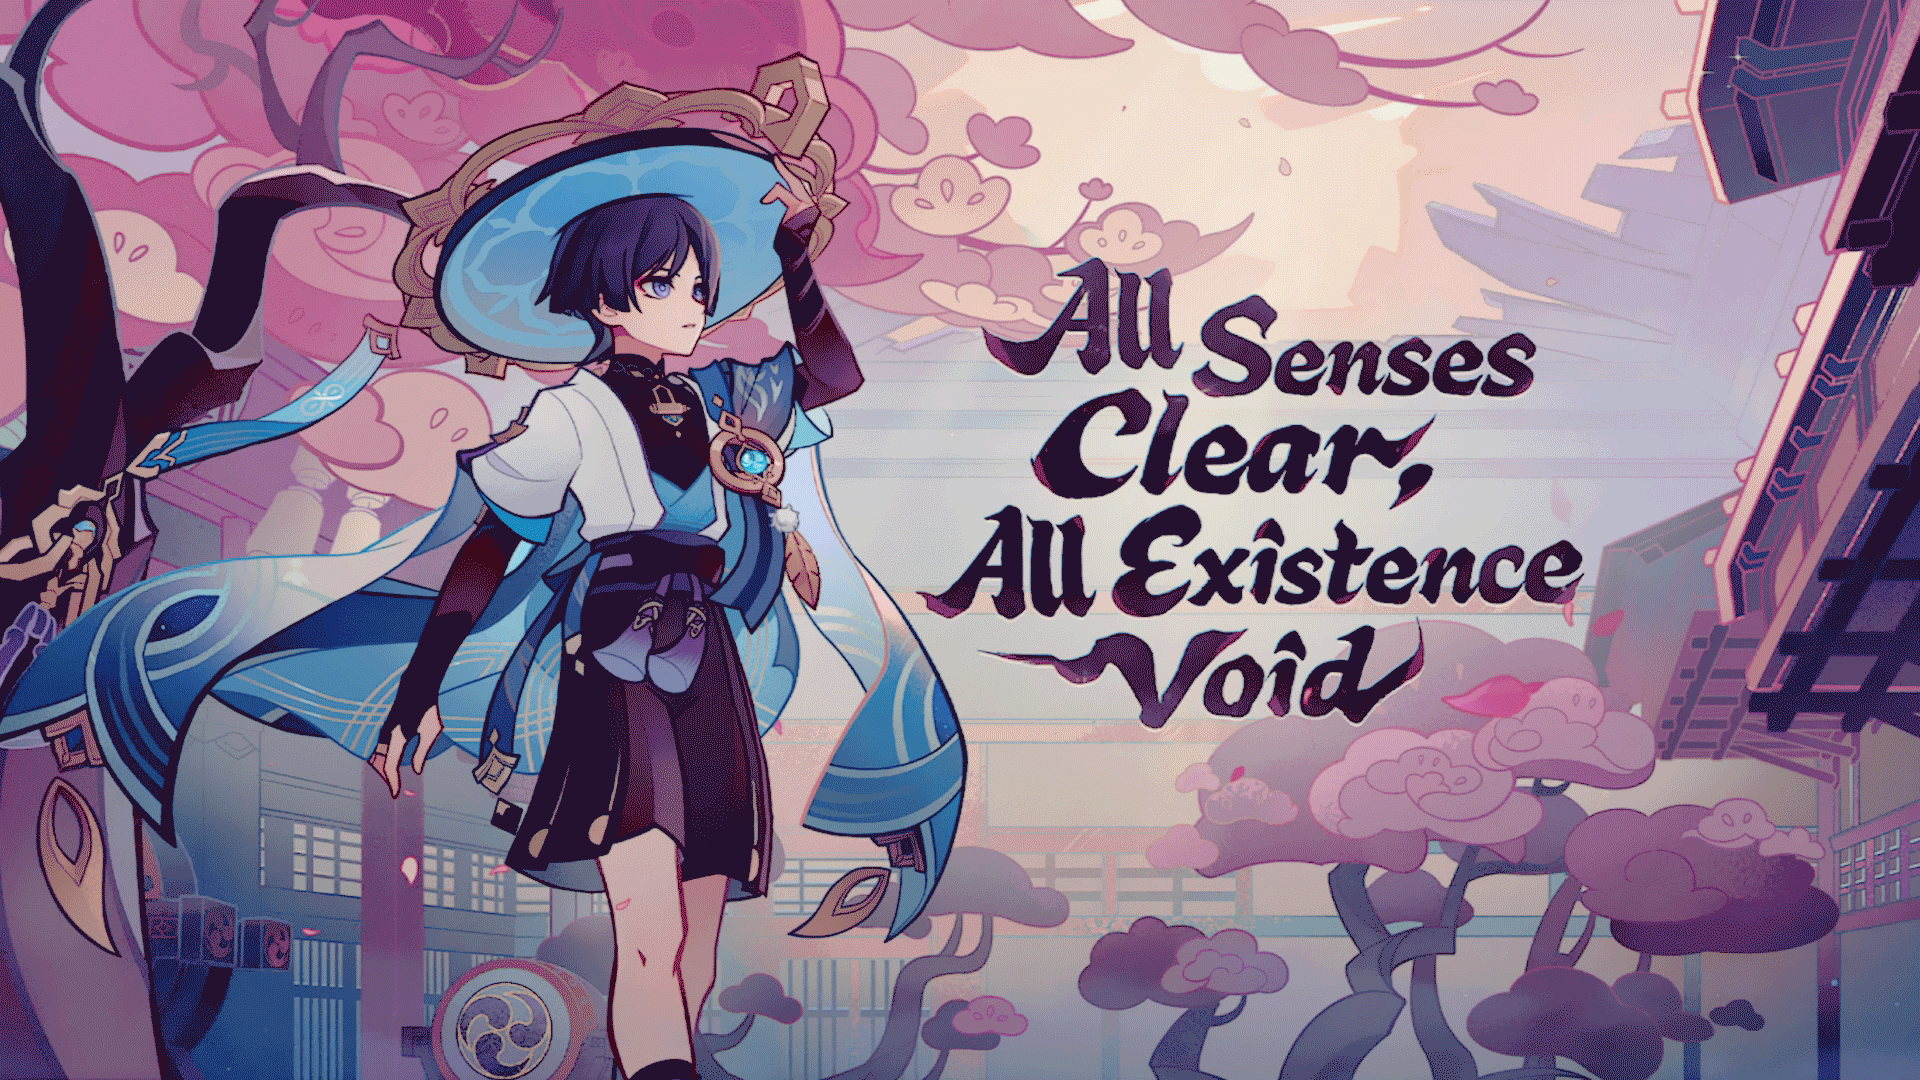 Version 3.3 All Senses Clear, All Existence Void Trailer